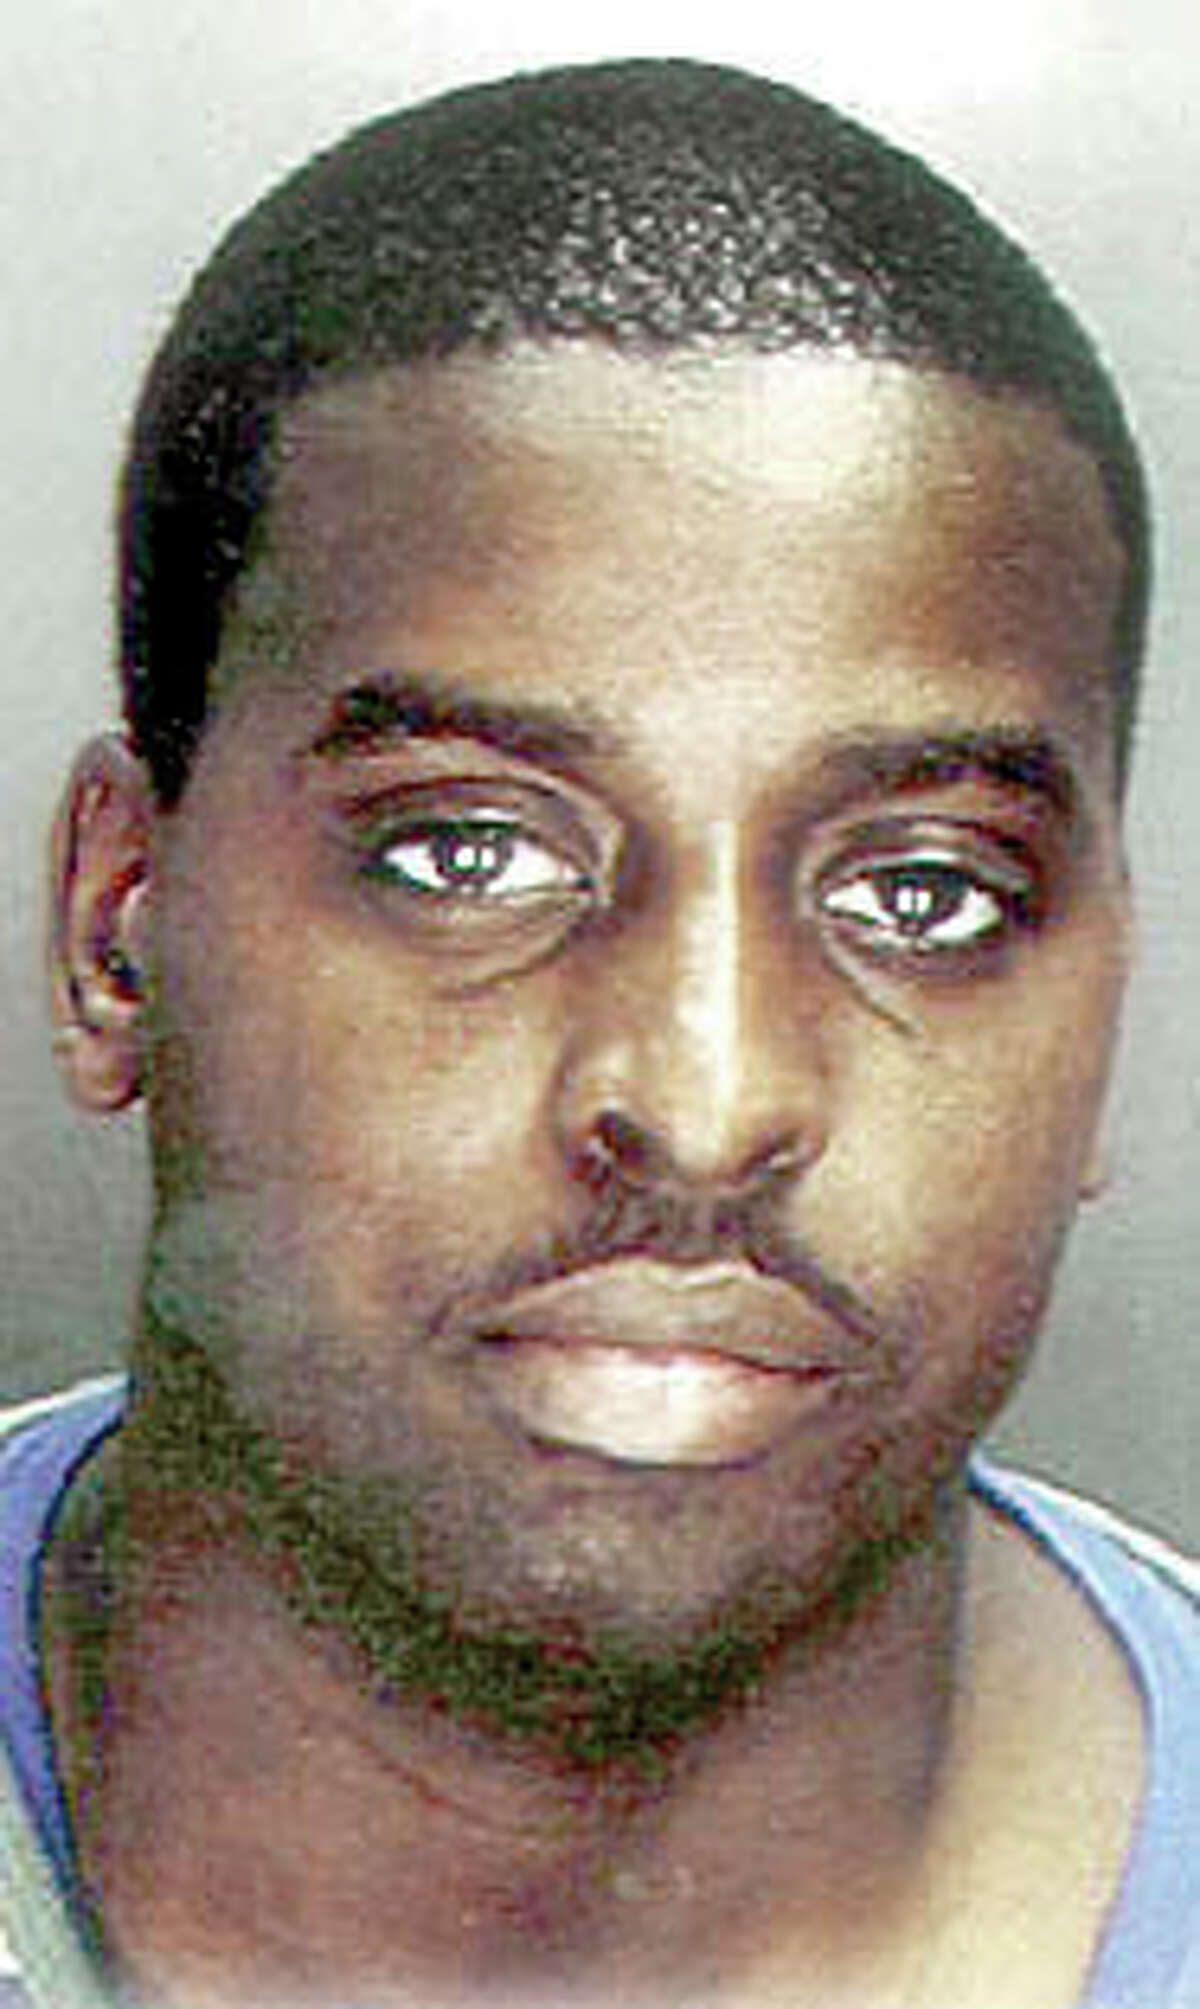 Russell Peeler, Jr. was convicted and sentenced to death in 2007 for ordering his younger brother, Adrian Peeler, to kill Karen Clarke and her eight-year-old son, Leroy "B.J." Brown, Jr., in their Bridgeport, Conn. duplex on January 8, 1999.